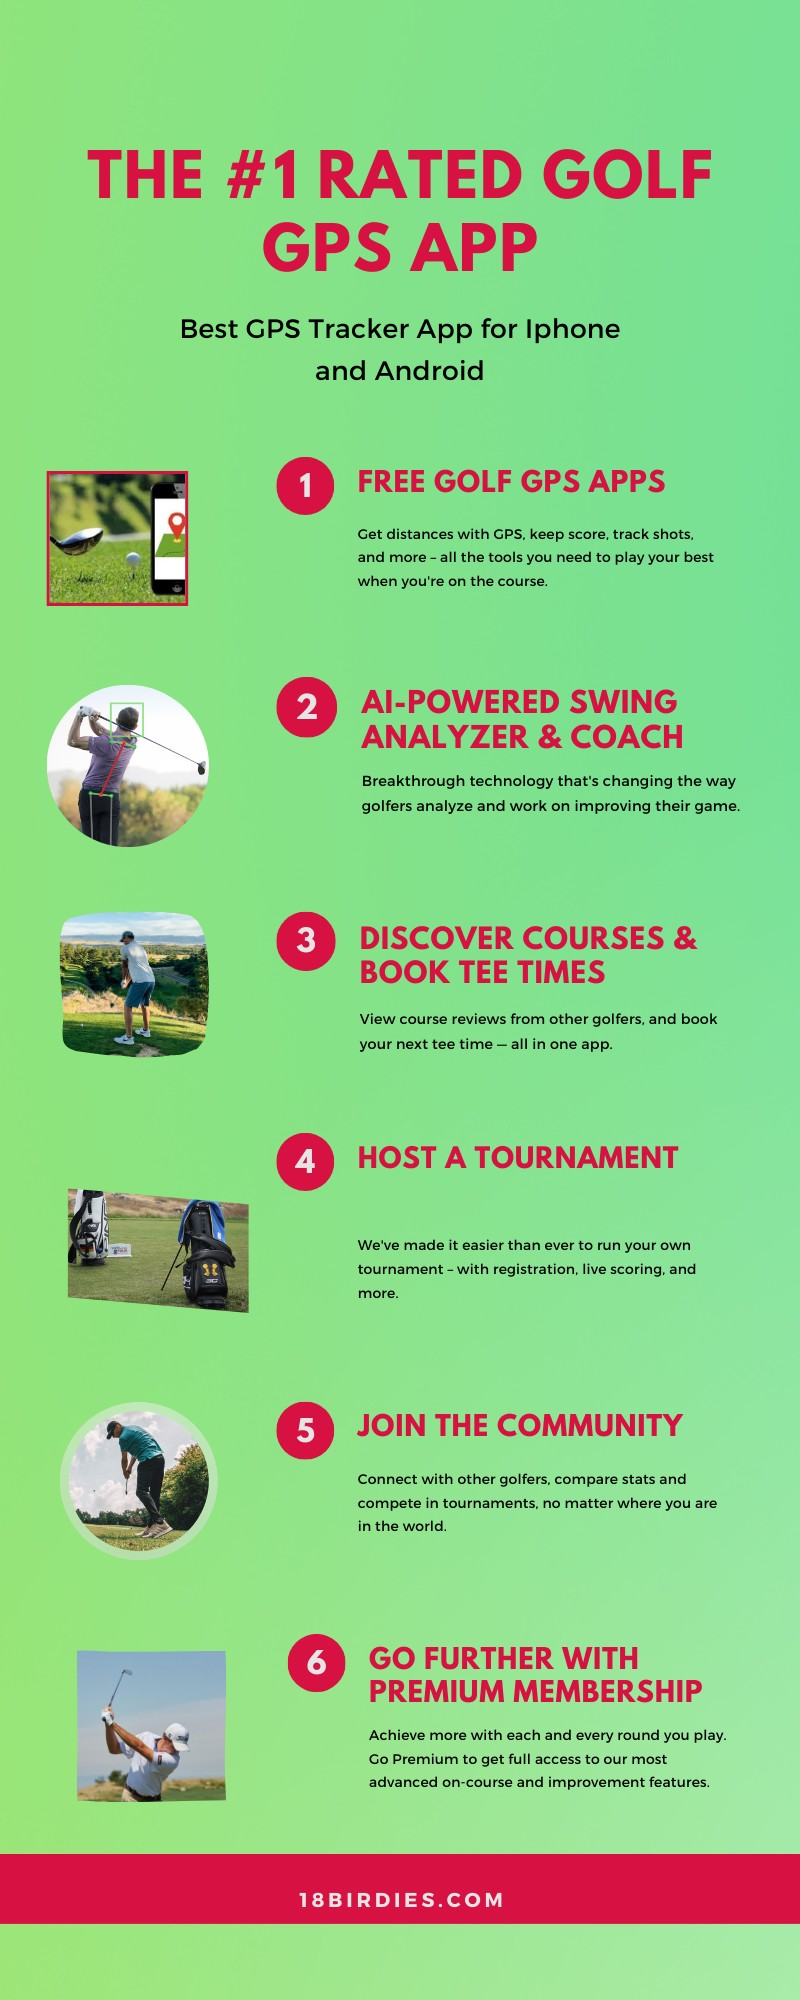 Best Golf GPS Apps to Help Play More Golf